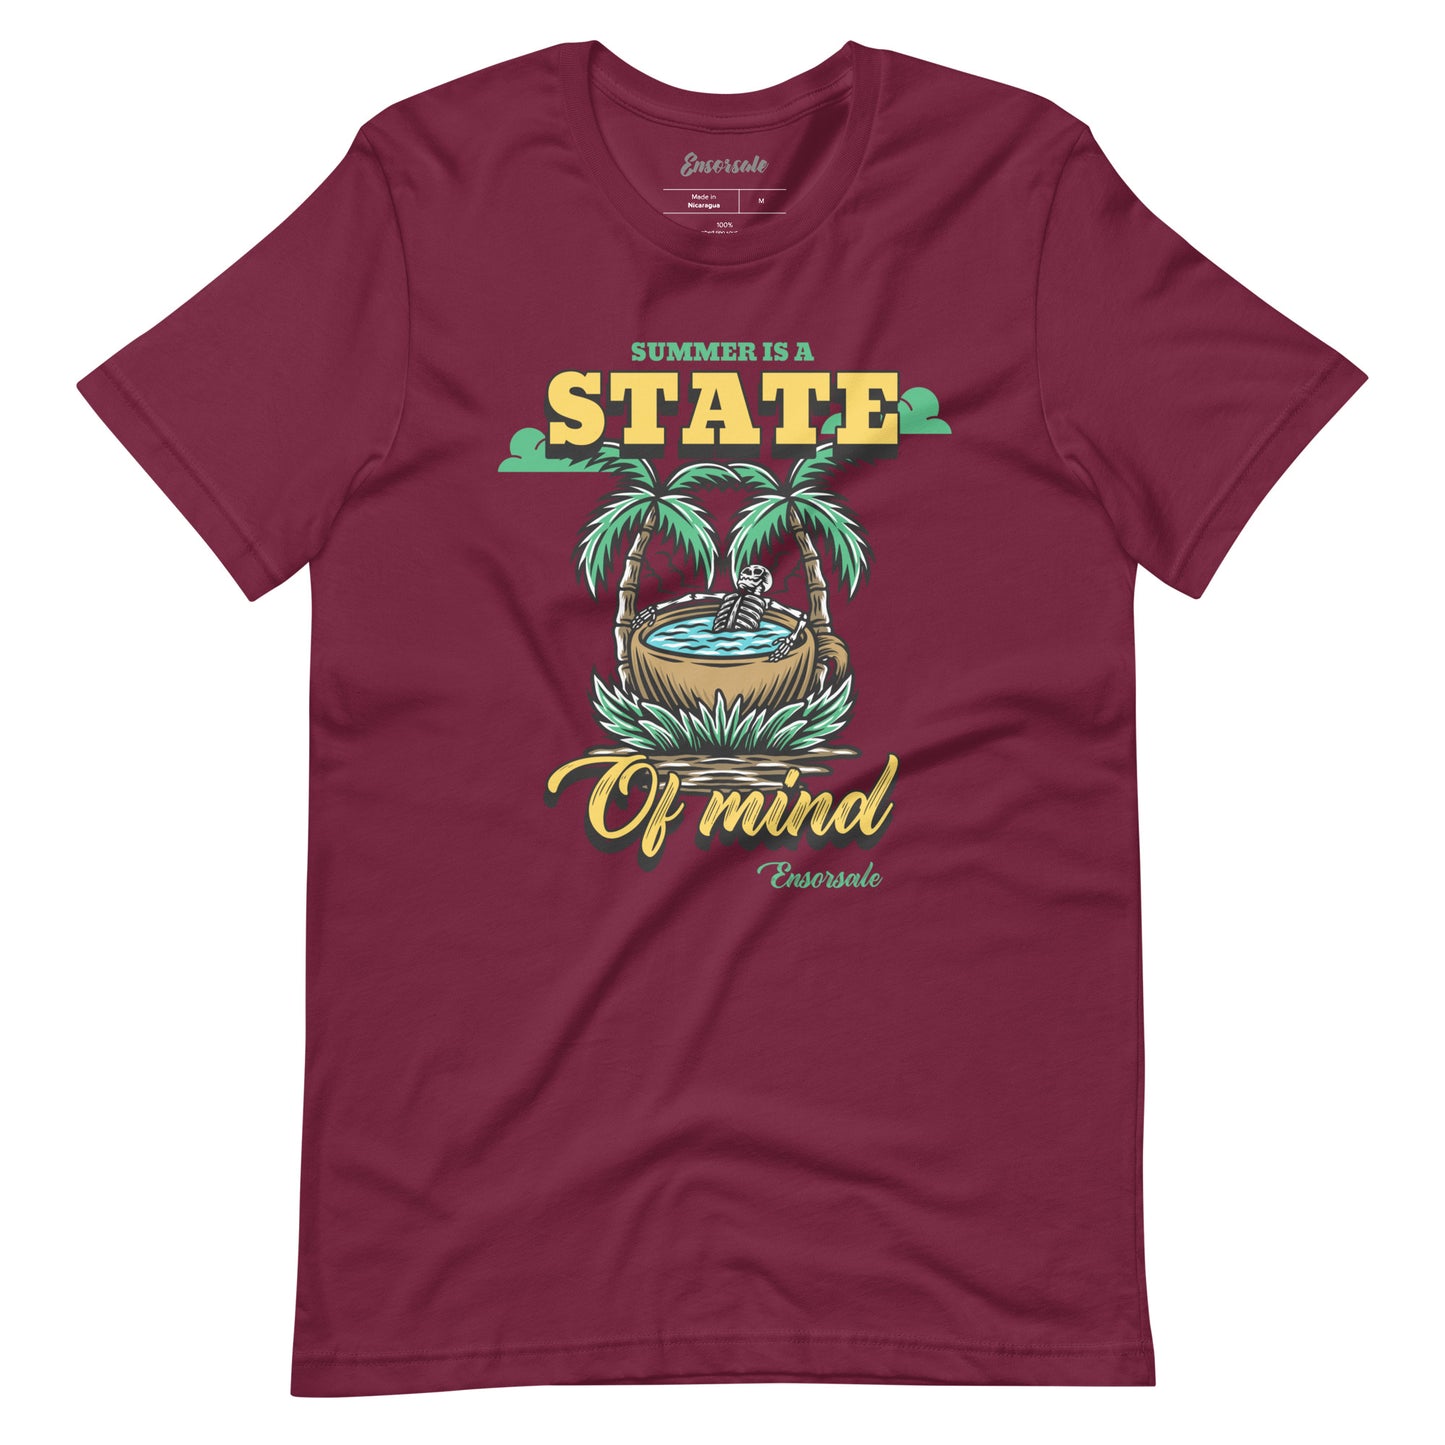 Summer is a State of Mind T-Shirt